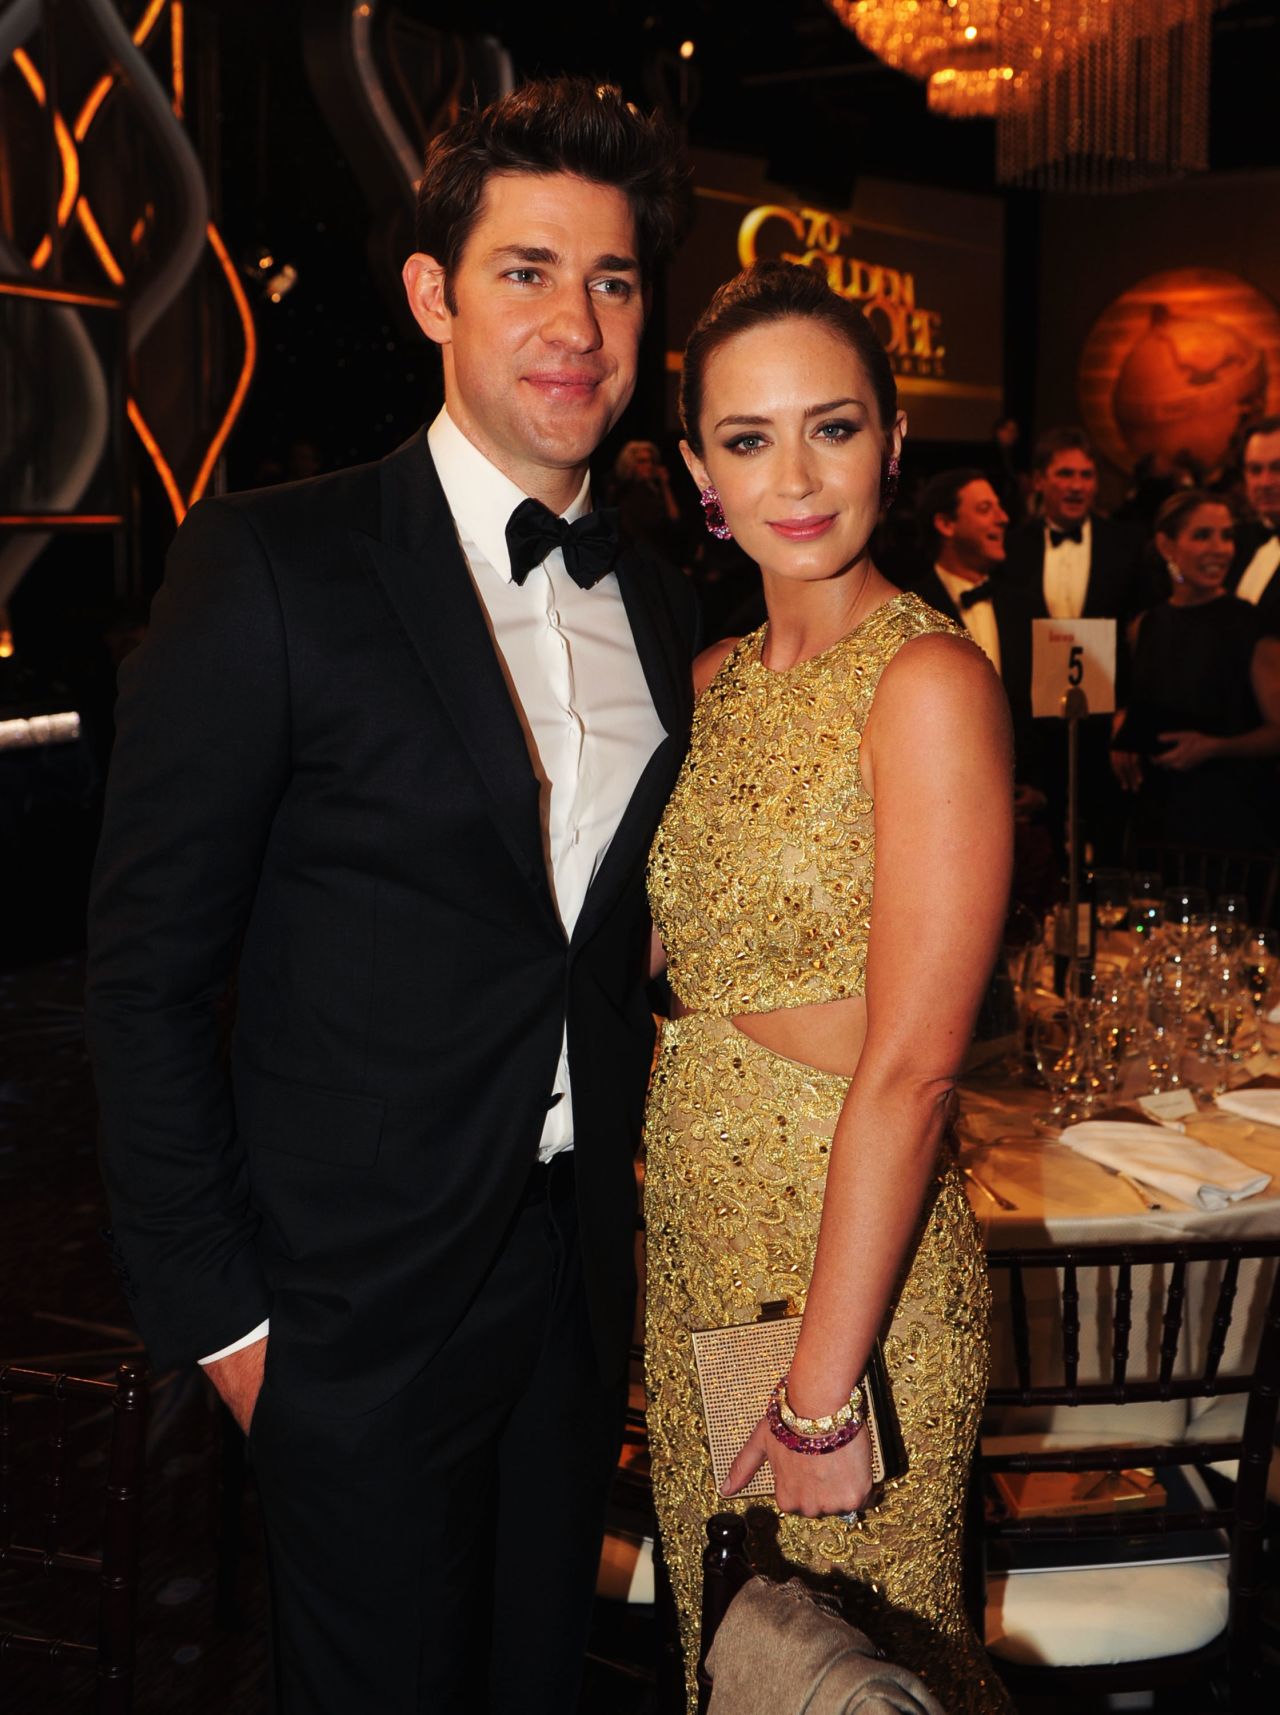 You don't often hear much about John Krasinski and his wife, Emily Blunt. The pair didn't confirm they were a couple until they became engaged in 2009. "The Office" star announced via Twitter in February that his wife had given birth to their daughter. 